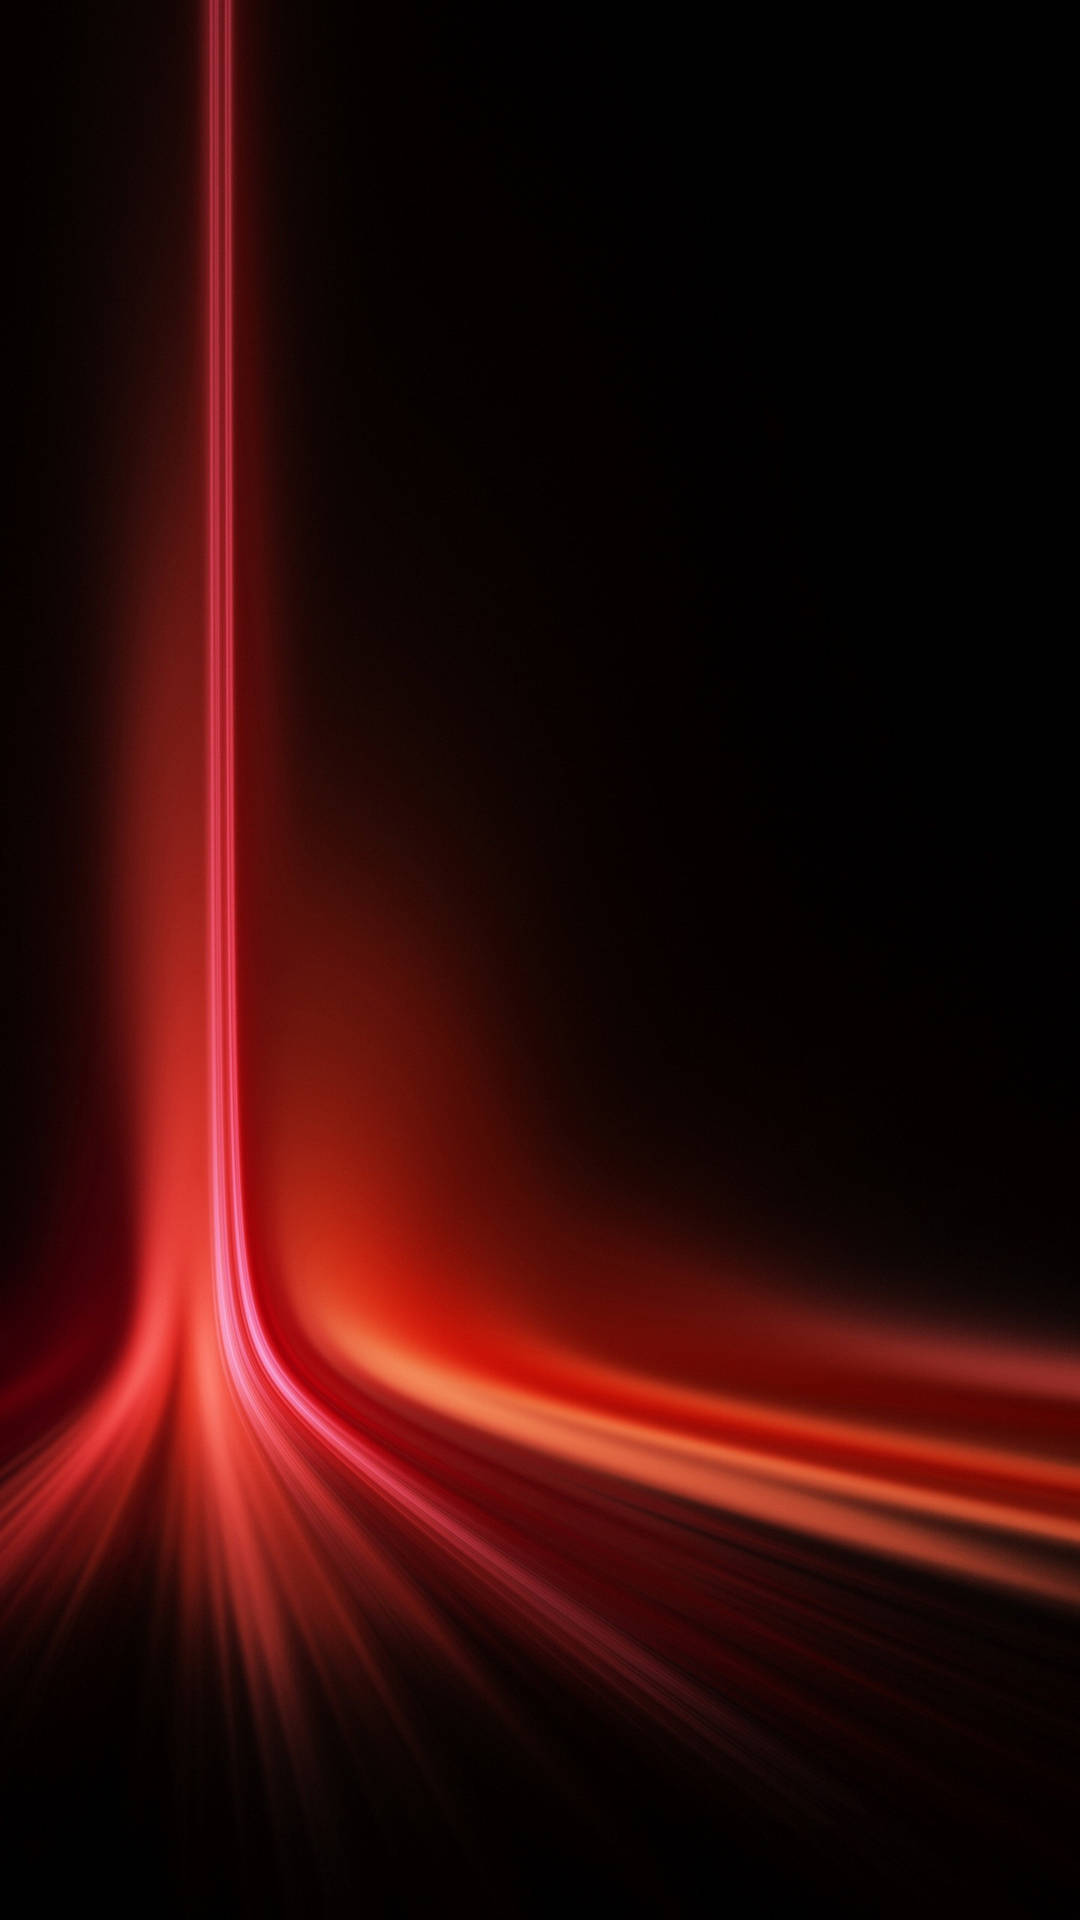 Red Black Abstract Samsung Galaxy Note 5 Background